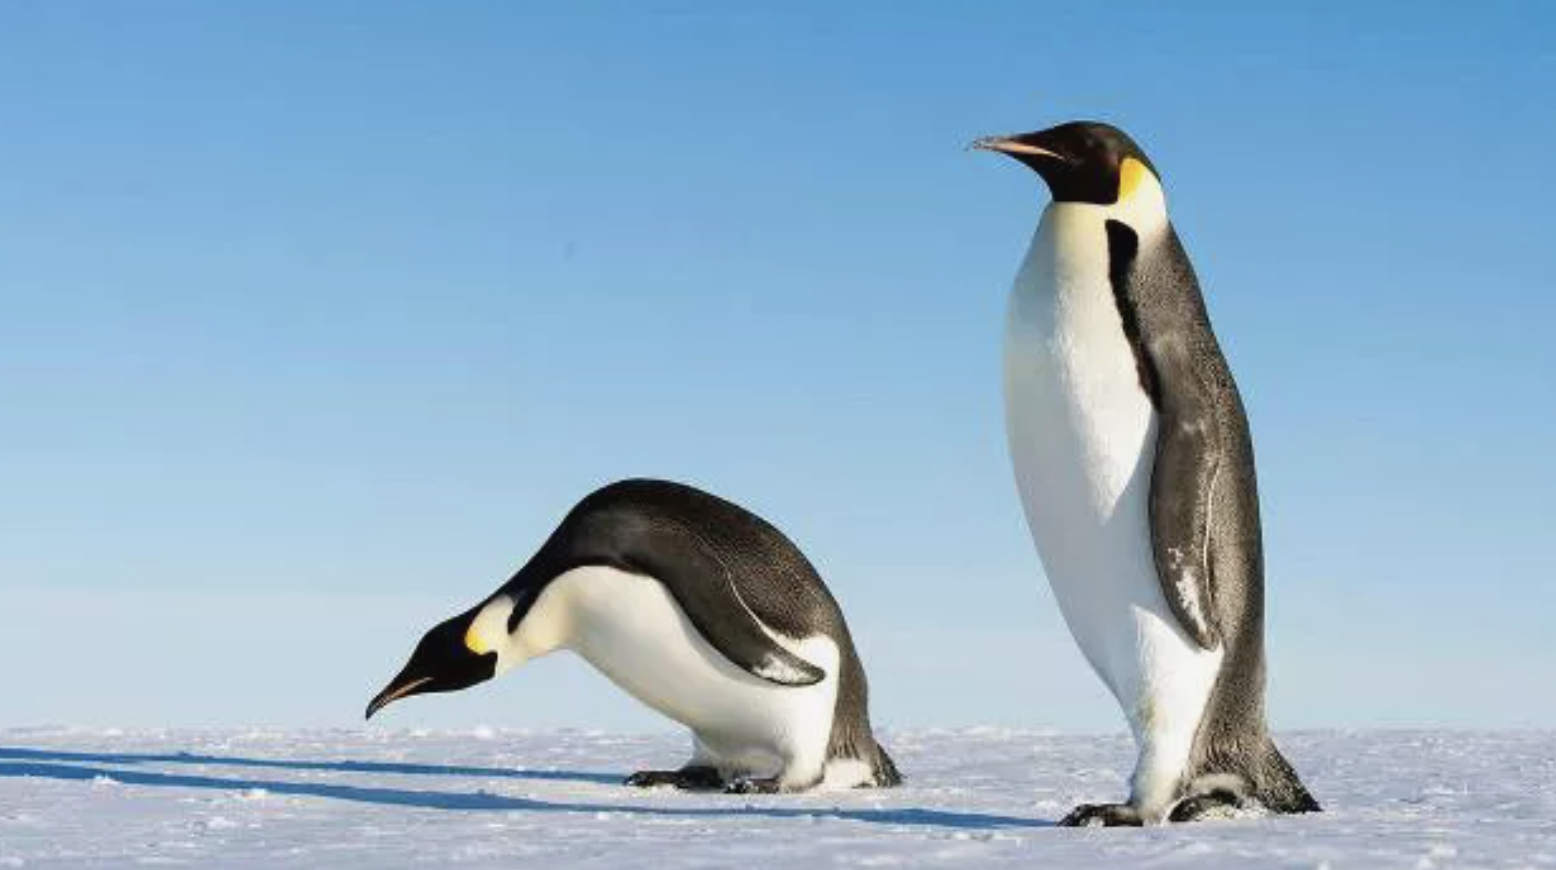 “Fossil remains of an extinct colossus penguin was nearly 7 feet tall and weighed 250 pounds, unearthed in Antarctica”